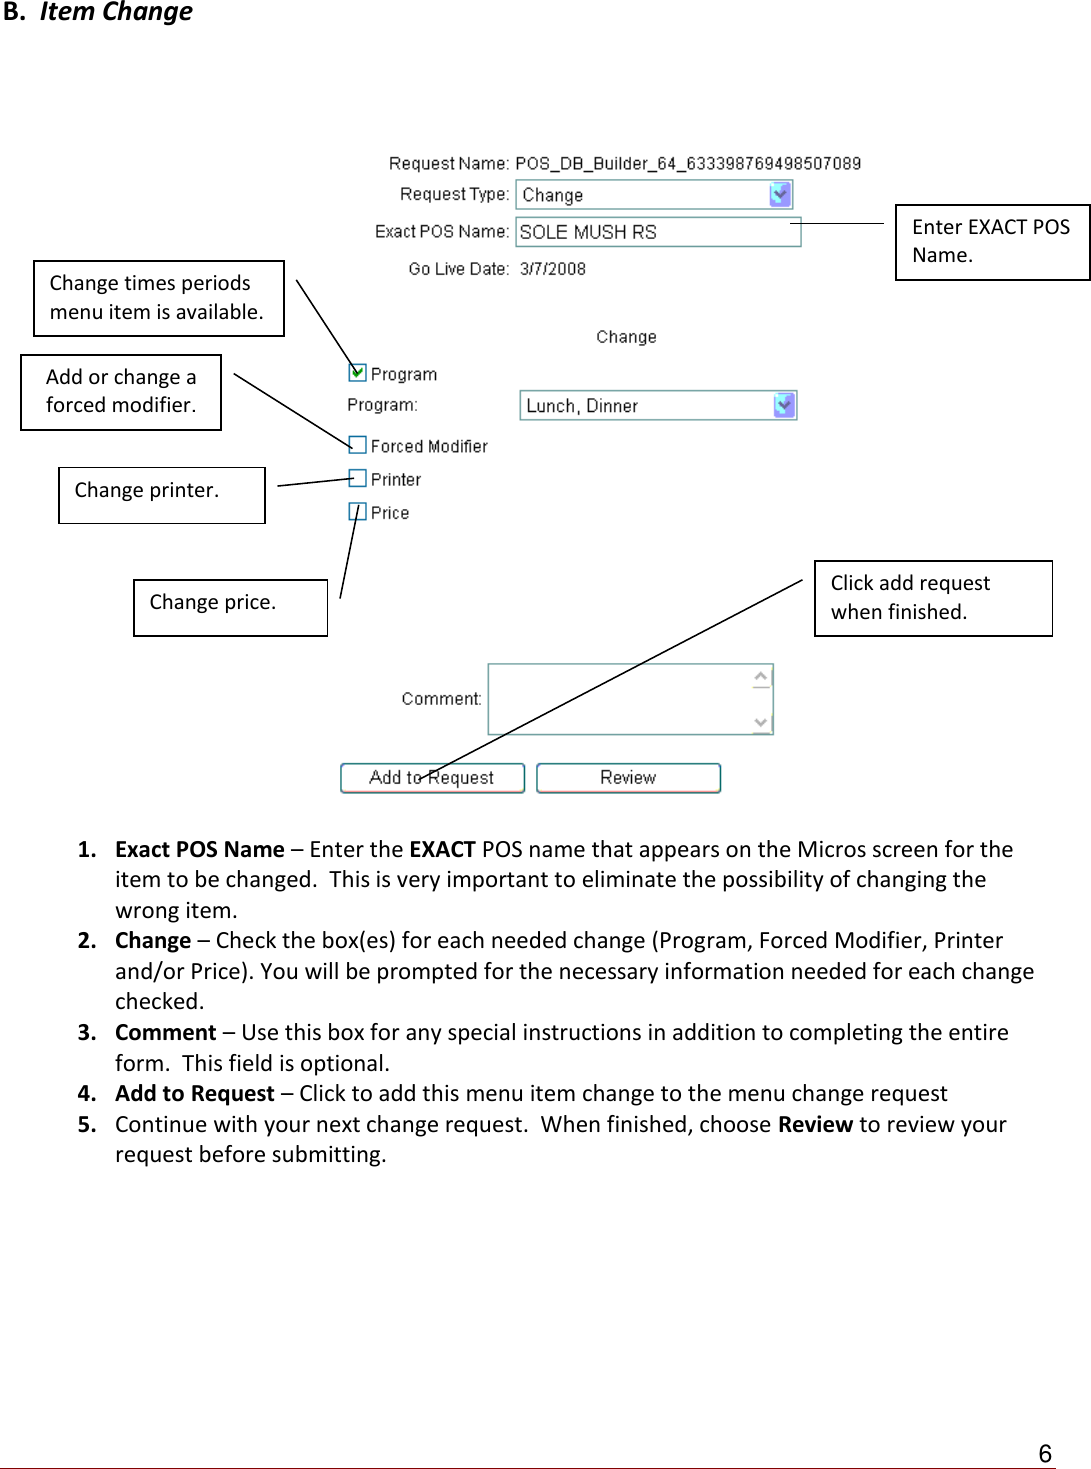 Page 6 of 12 - OMCF User Instructions